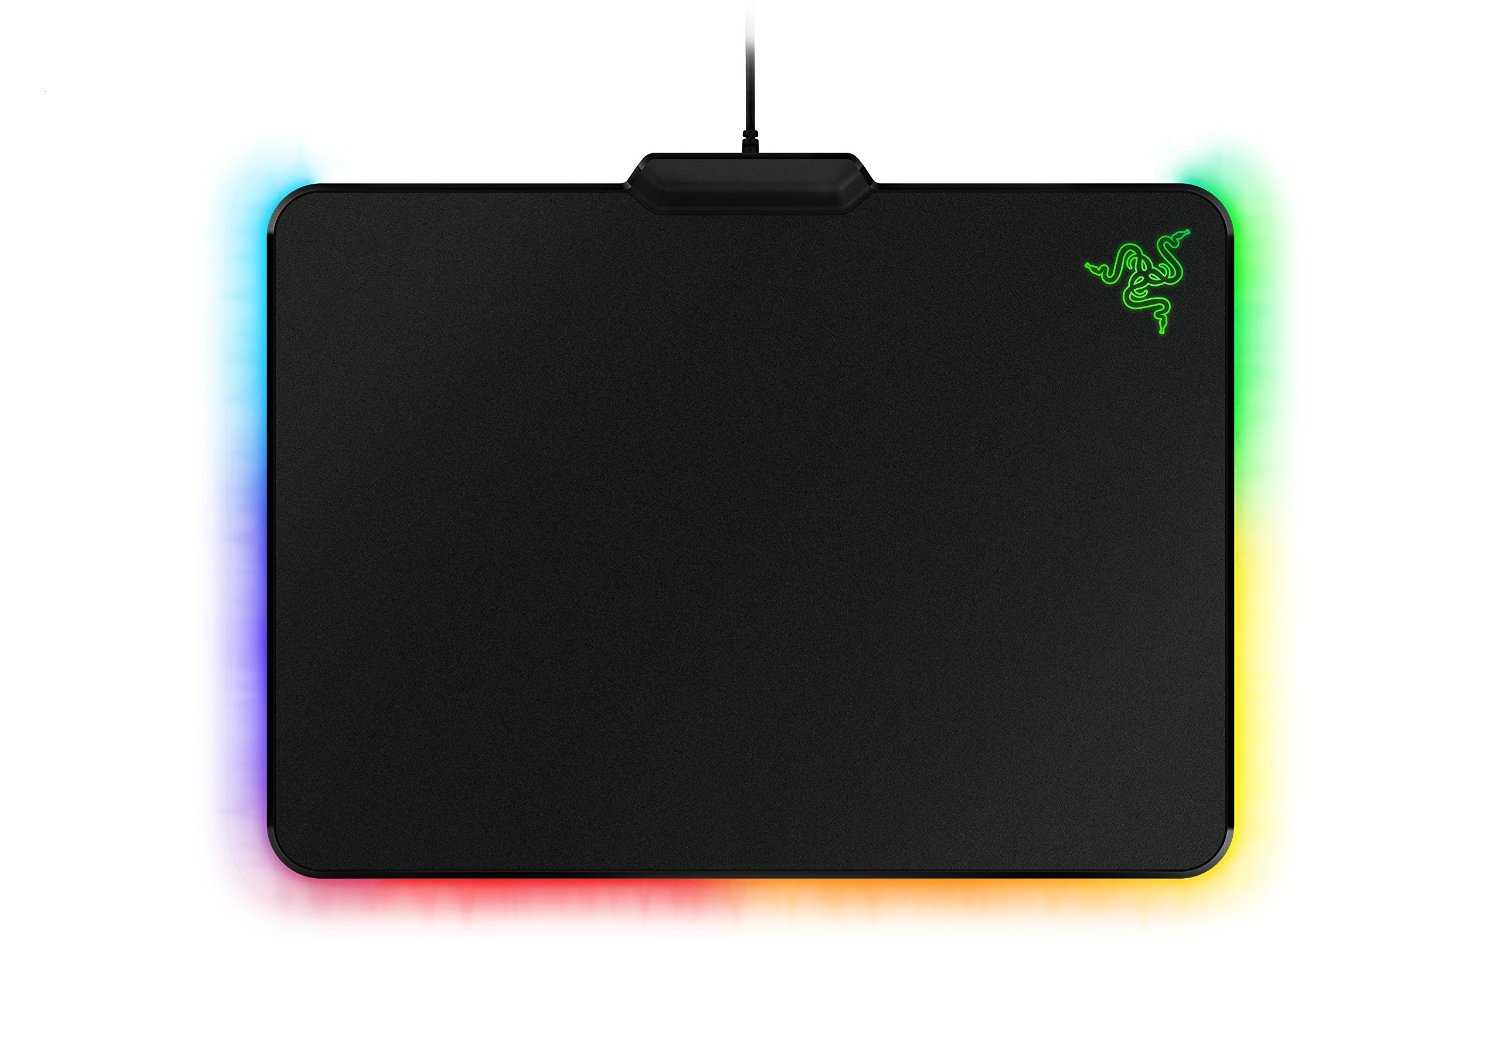 Best Gaming Mouse Pad Review 2020 : Buyer's Guide